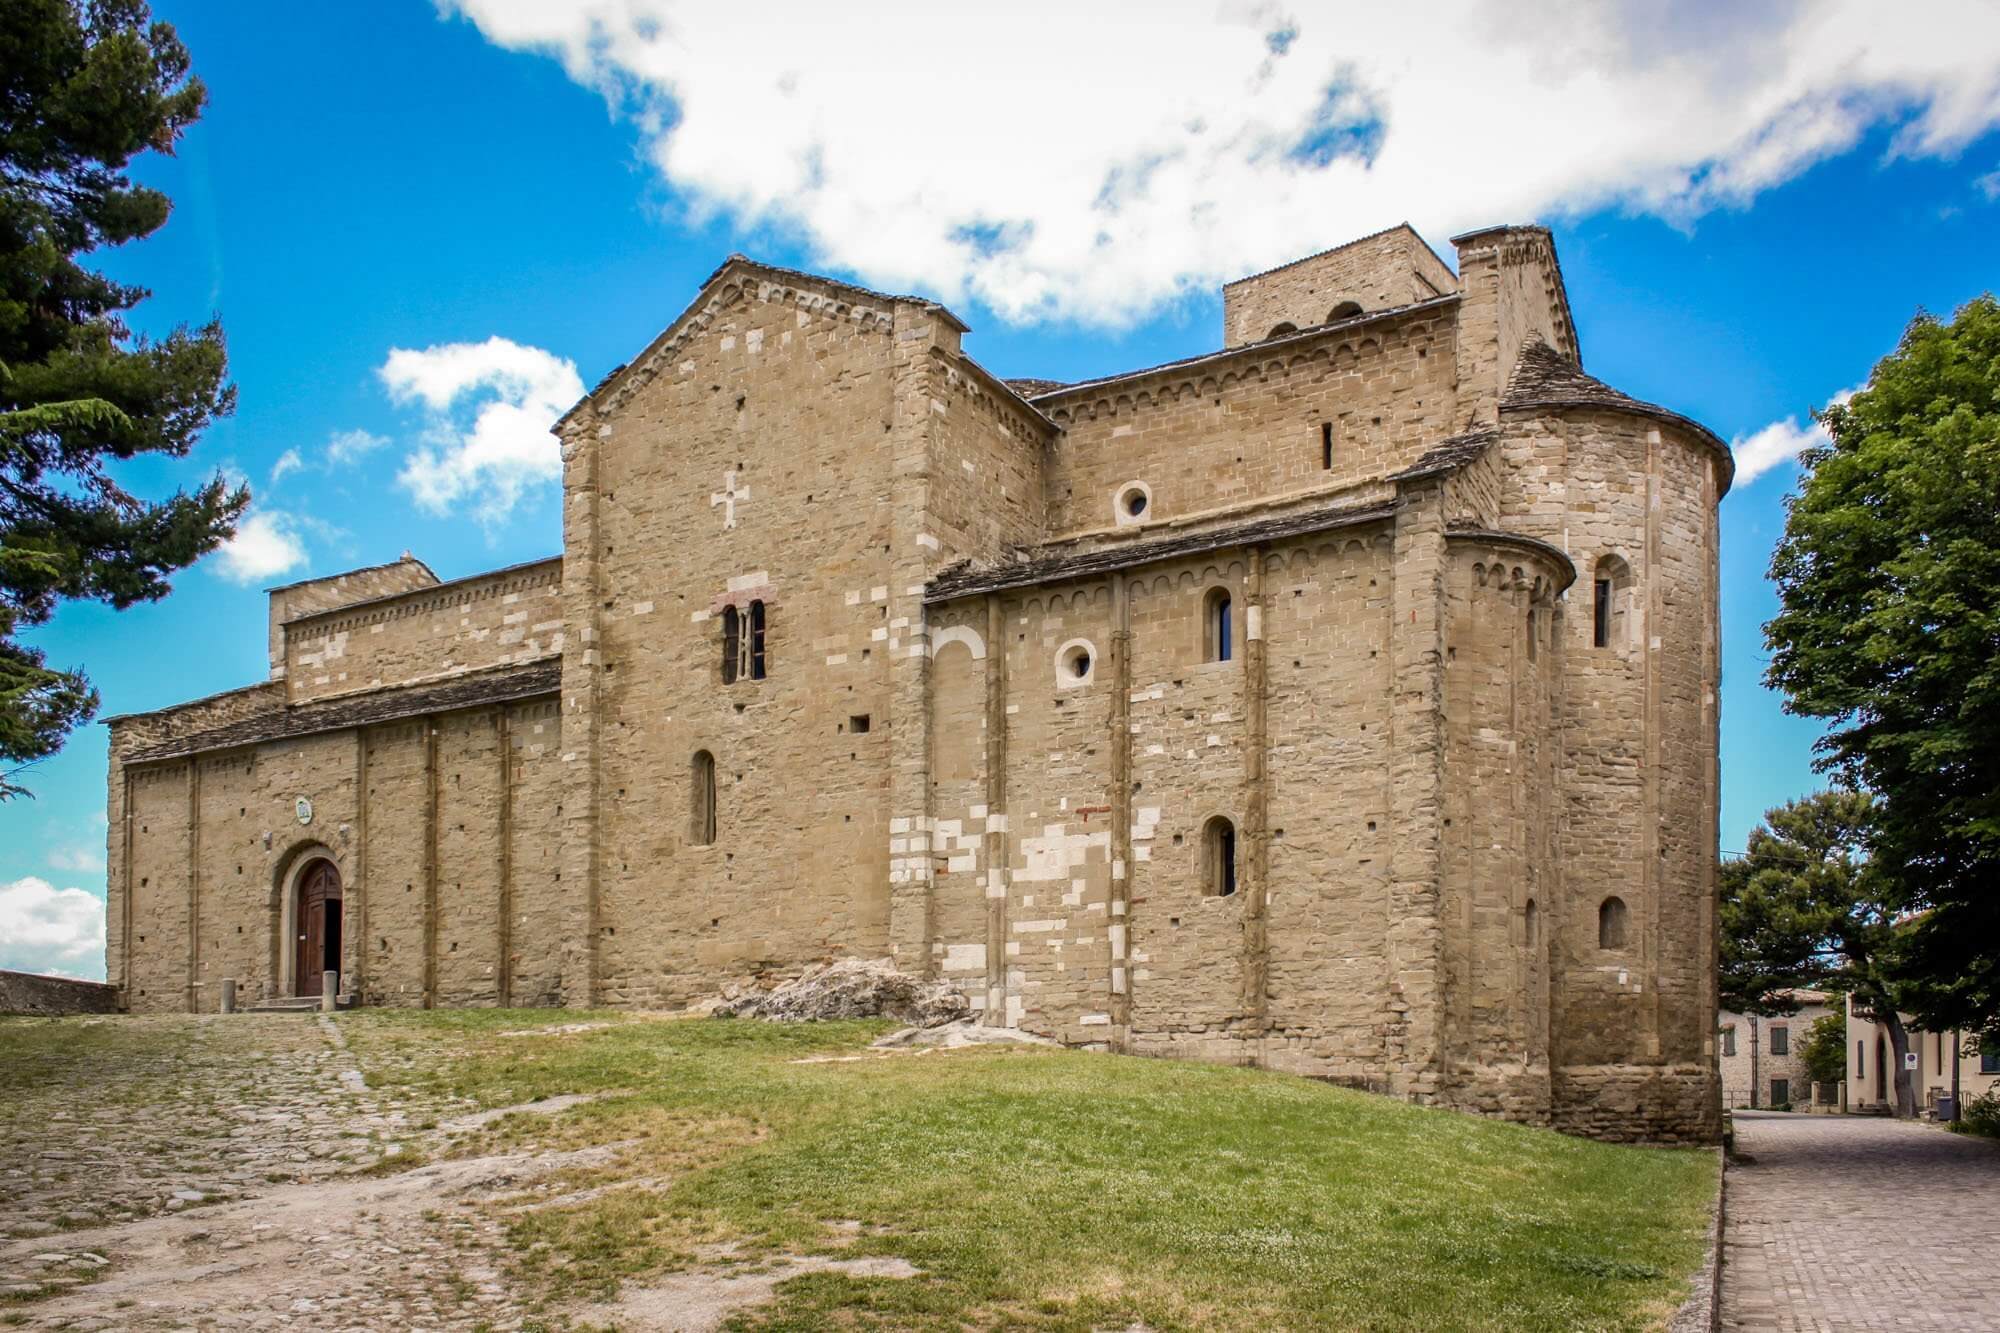 The exterior of the cathedral in San Leo, Le Marche, Italy